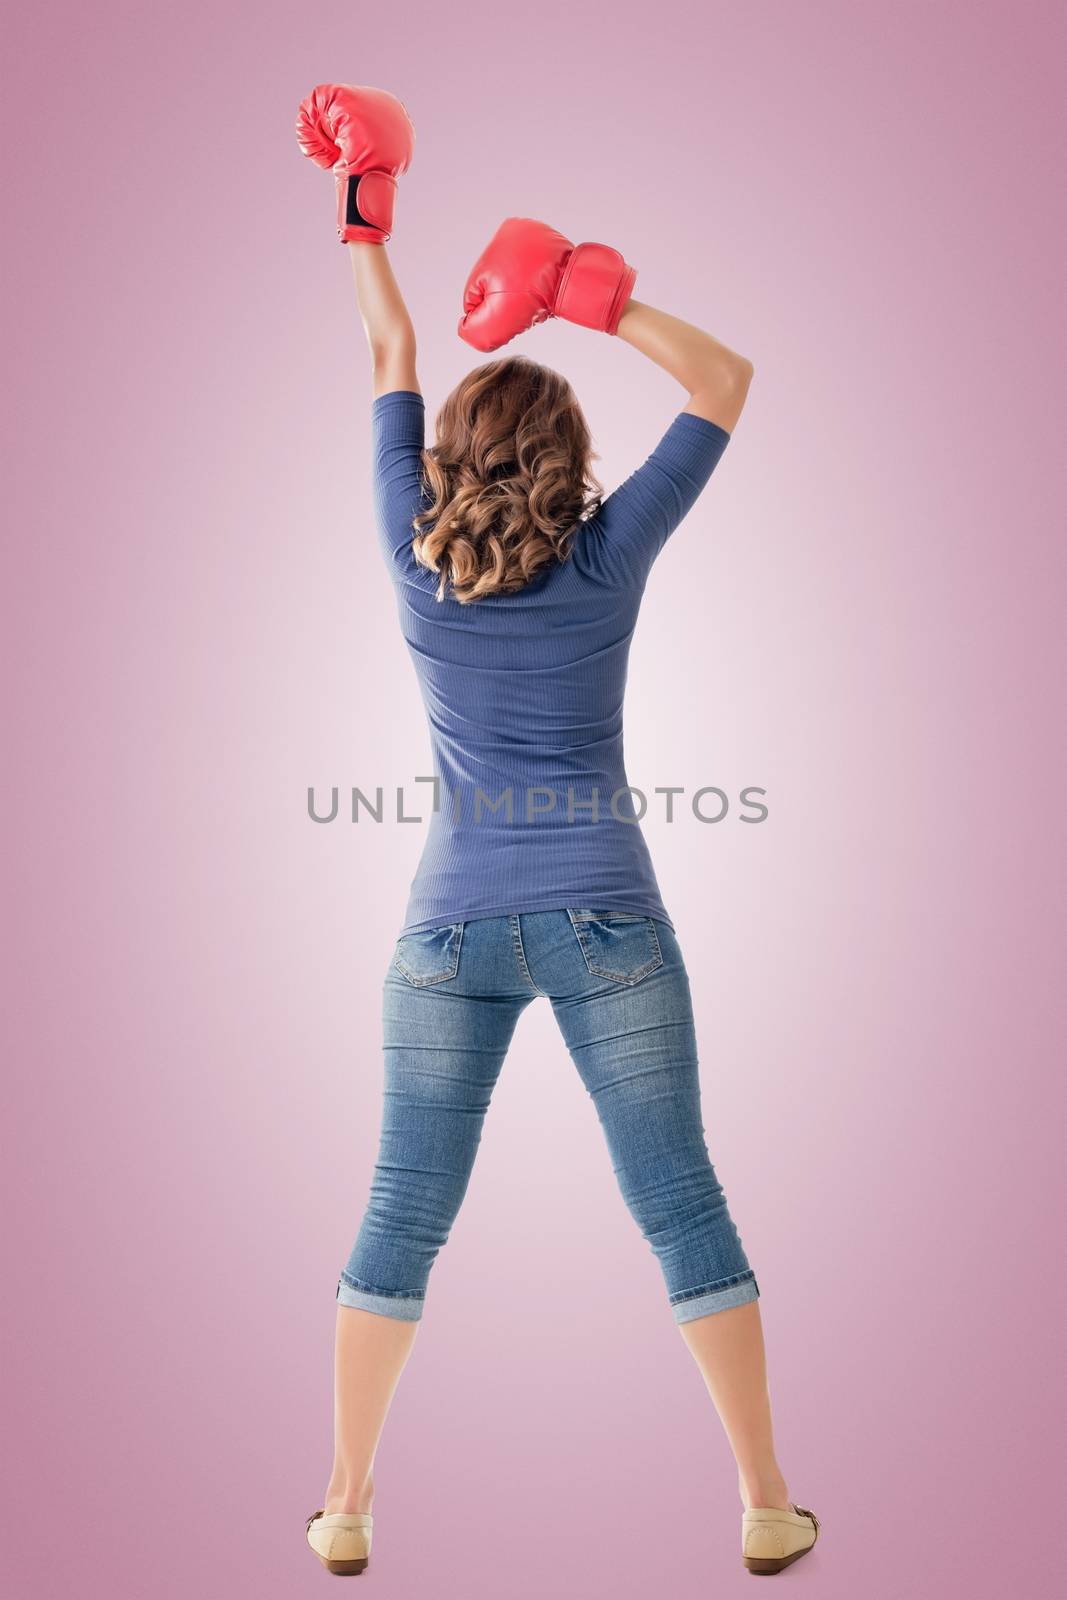 Fighting girl concept, rear view full length portrait of Asian isolated on white.